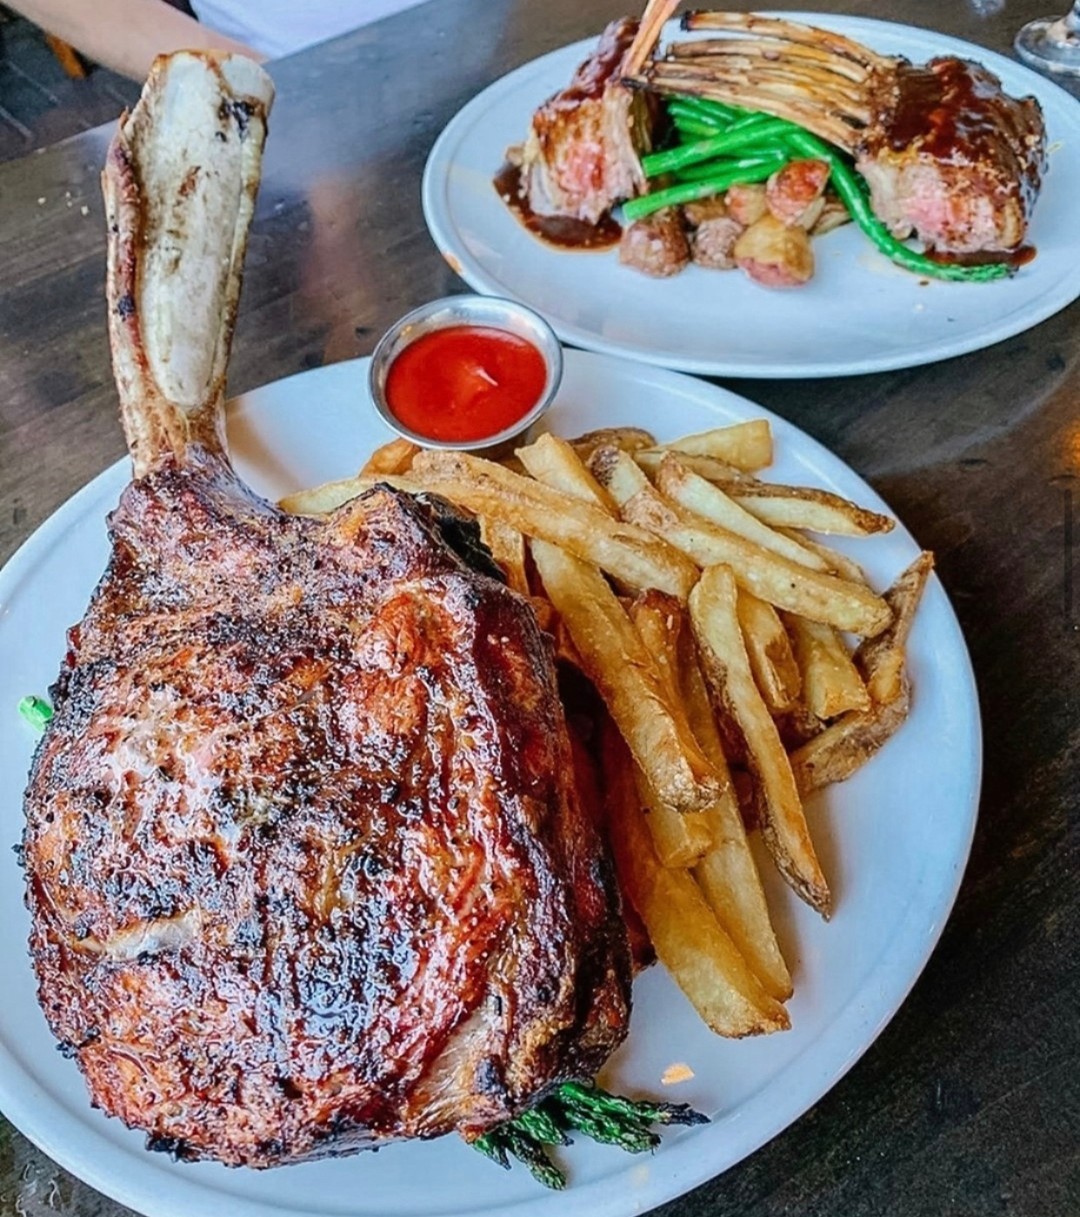 Tomahawk for 2!? Yes, please @midgleys_public_house! 🍖 @visitstockton's Restaurant Week is still in full swing and you can enjoy this delicious meal and many others through Sunday, January 23. 🙌 Click the link in our bio to preview @midgleys_public_house's menu and other participating Lincoln Center restaurants. 🍽️
📸: @wheresthedonut